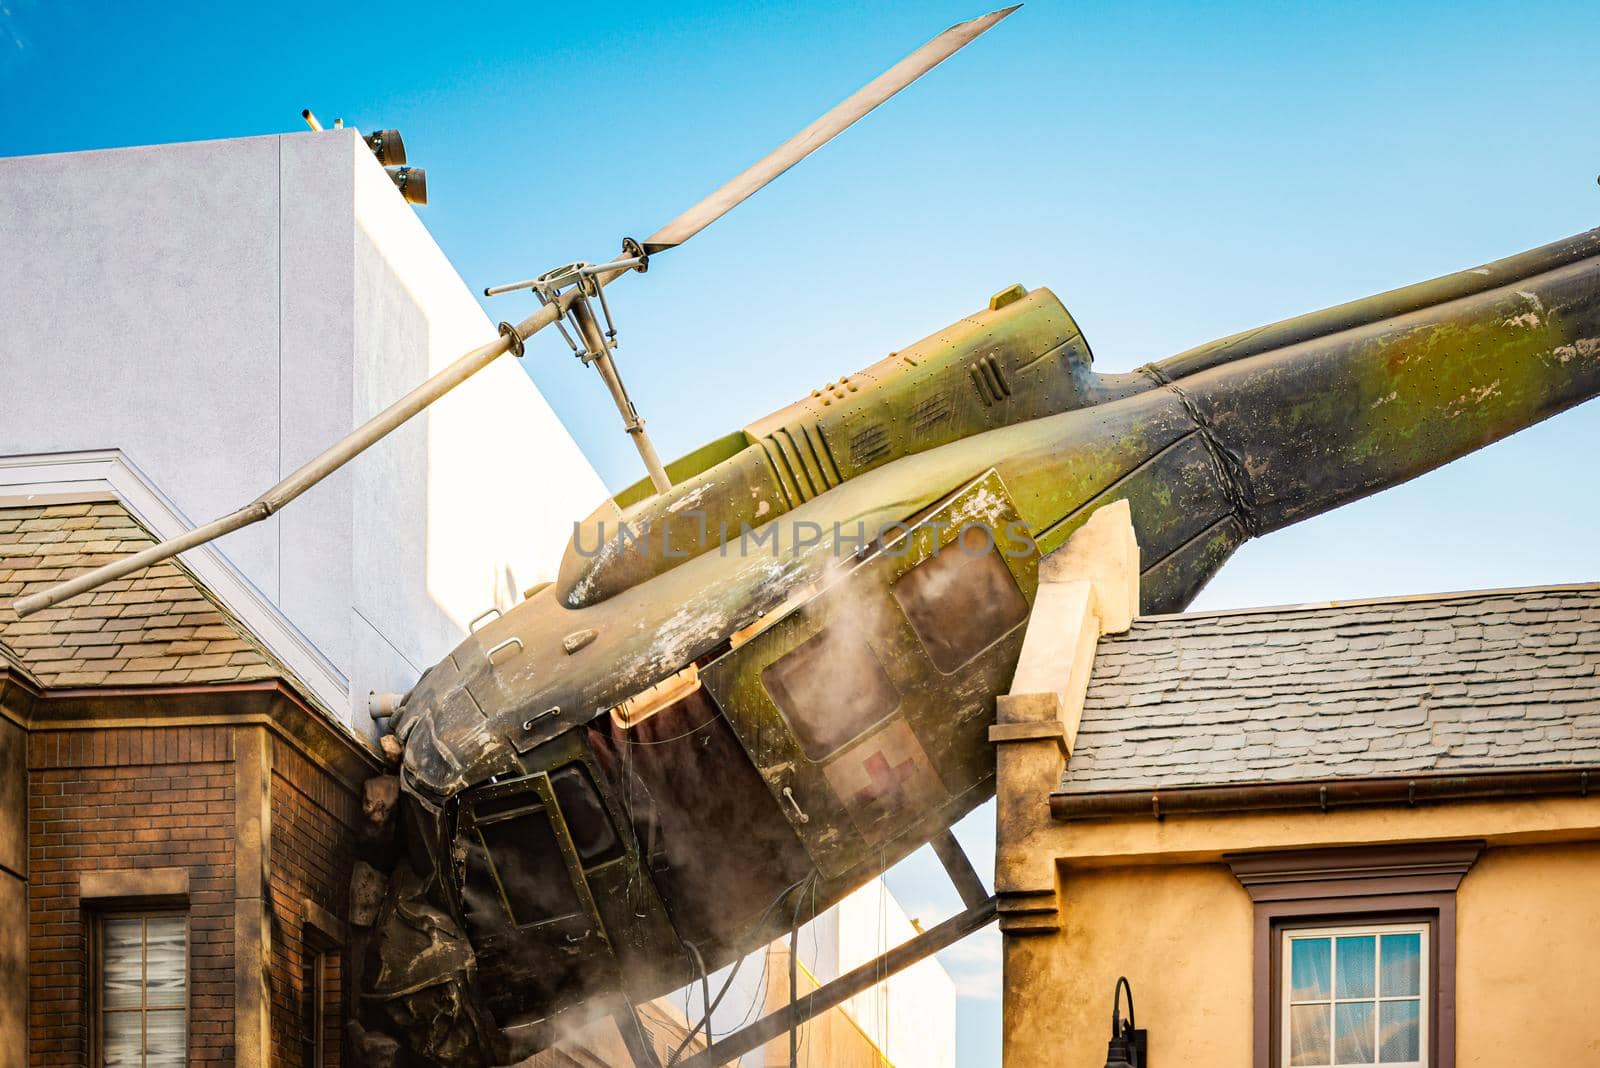 Army helicopter crashed into houses by Yolshin